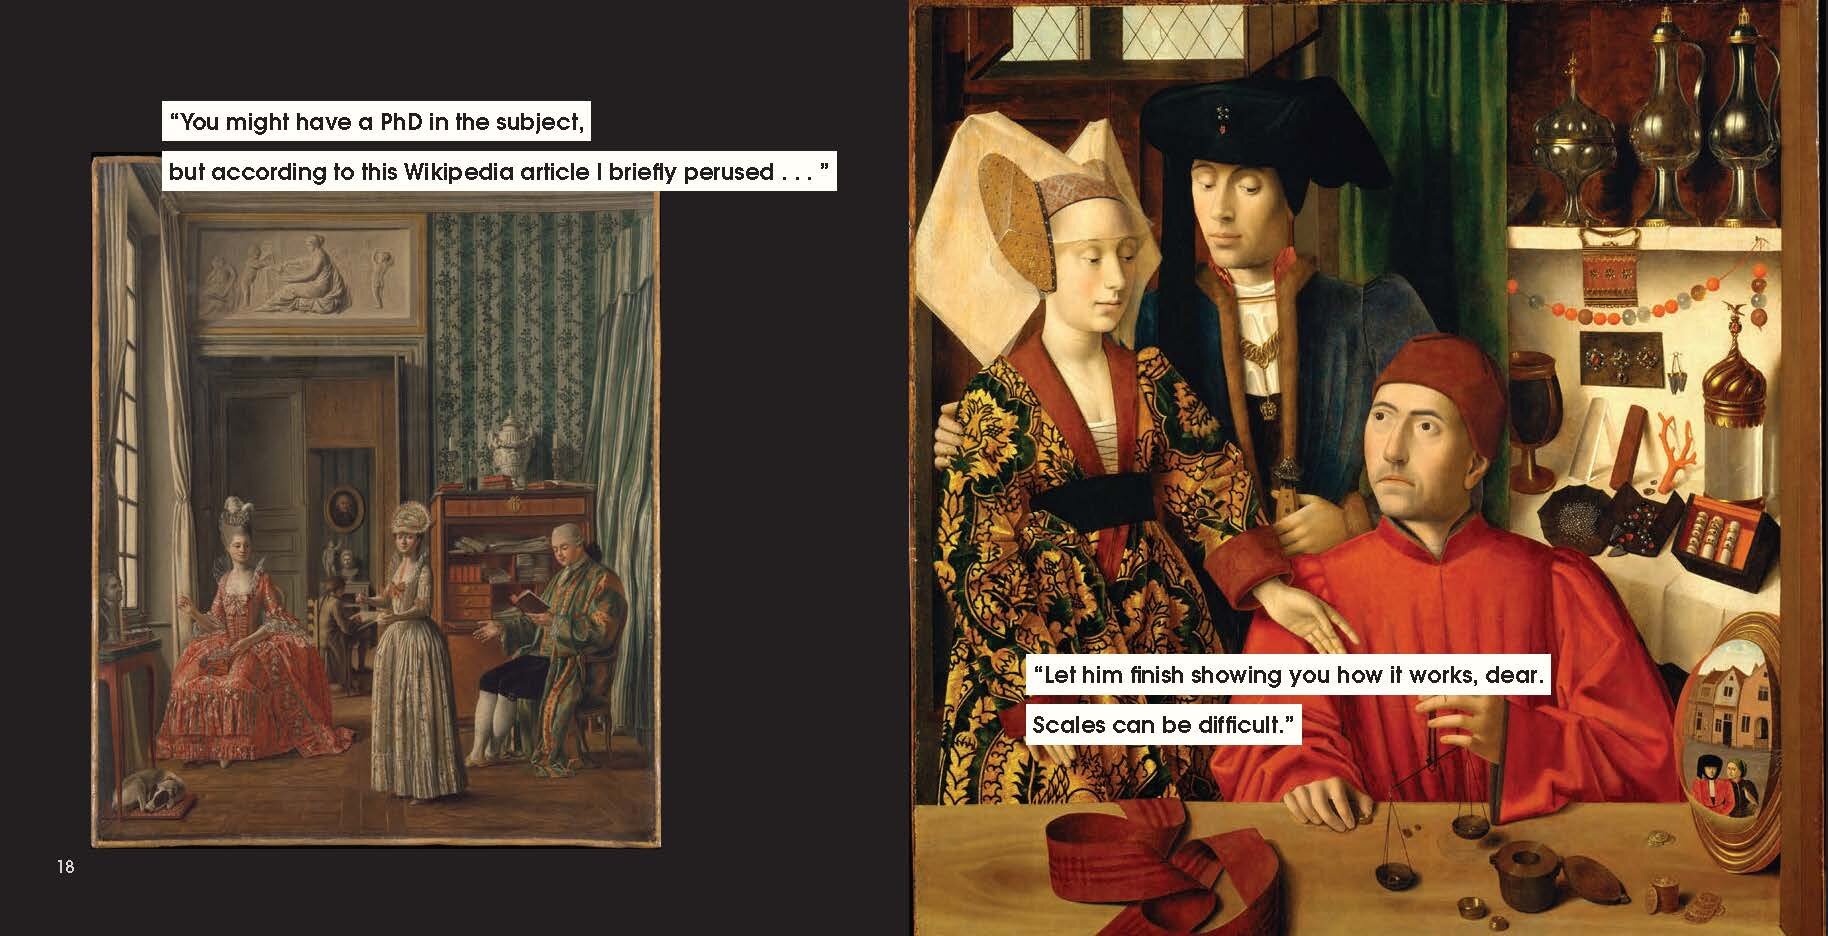 An old painting of two women and a man in a drawing room, all wealthy, is captioned, “You might have a PhD in the subject, but according to this Wikepedia article I briefly perused…” Another painting of a noblewoman gesturing to a man holding a scale has a similar witty caption.